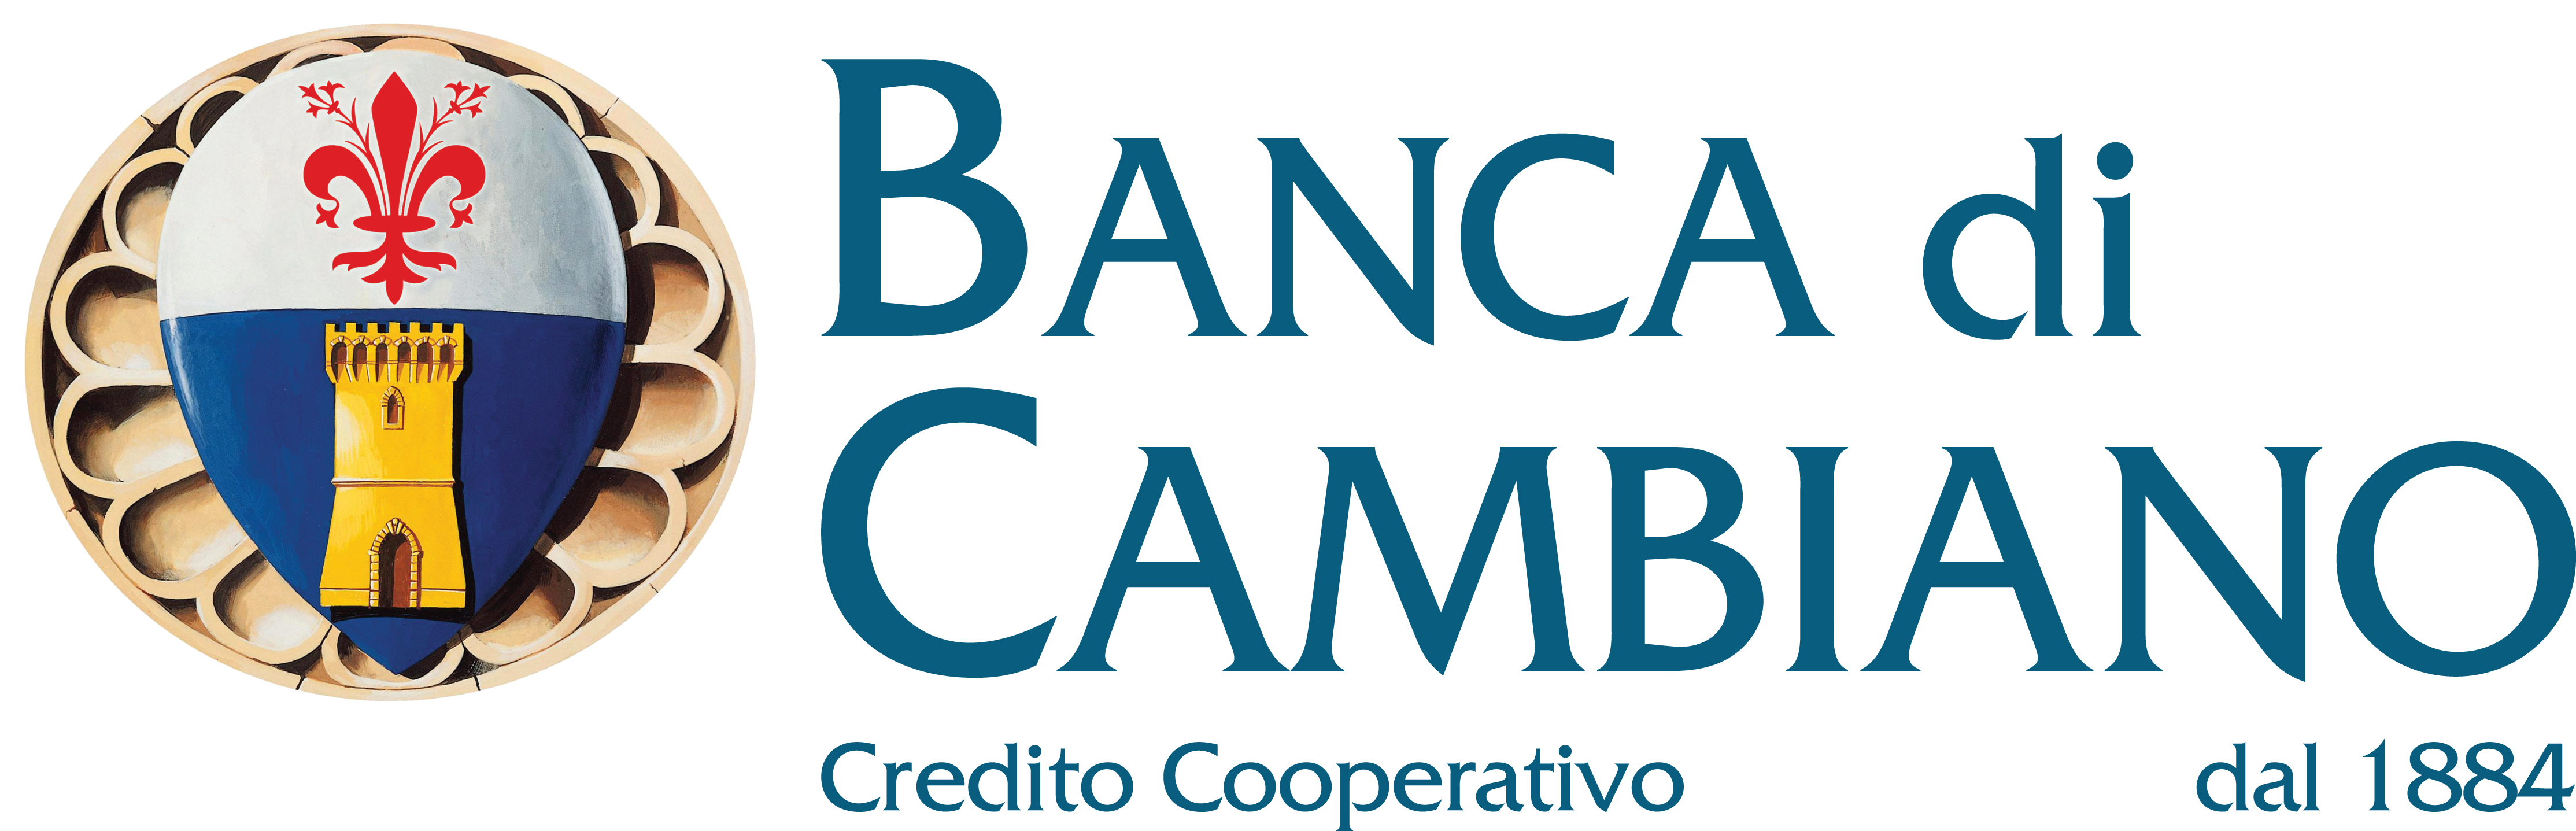 Banca Cambiano Cred.Coop.